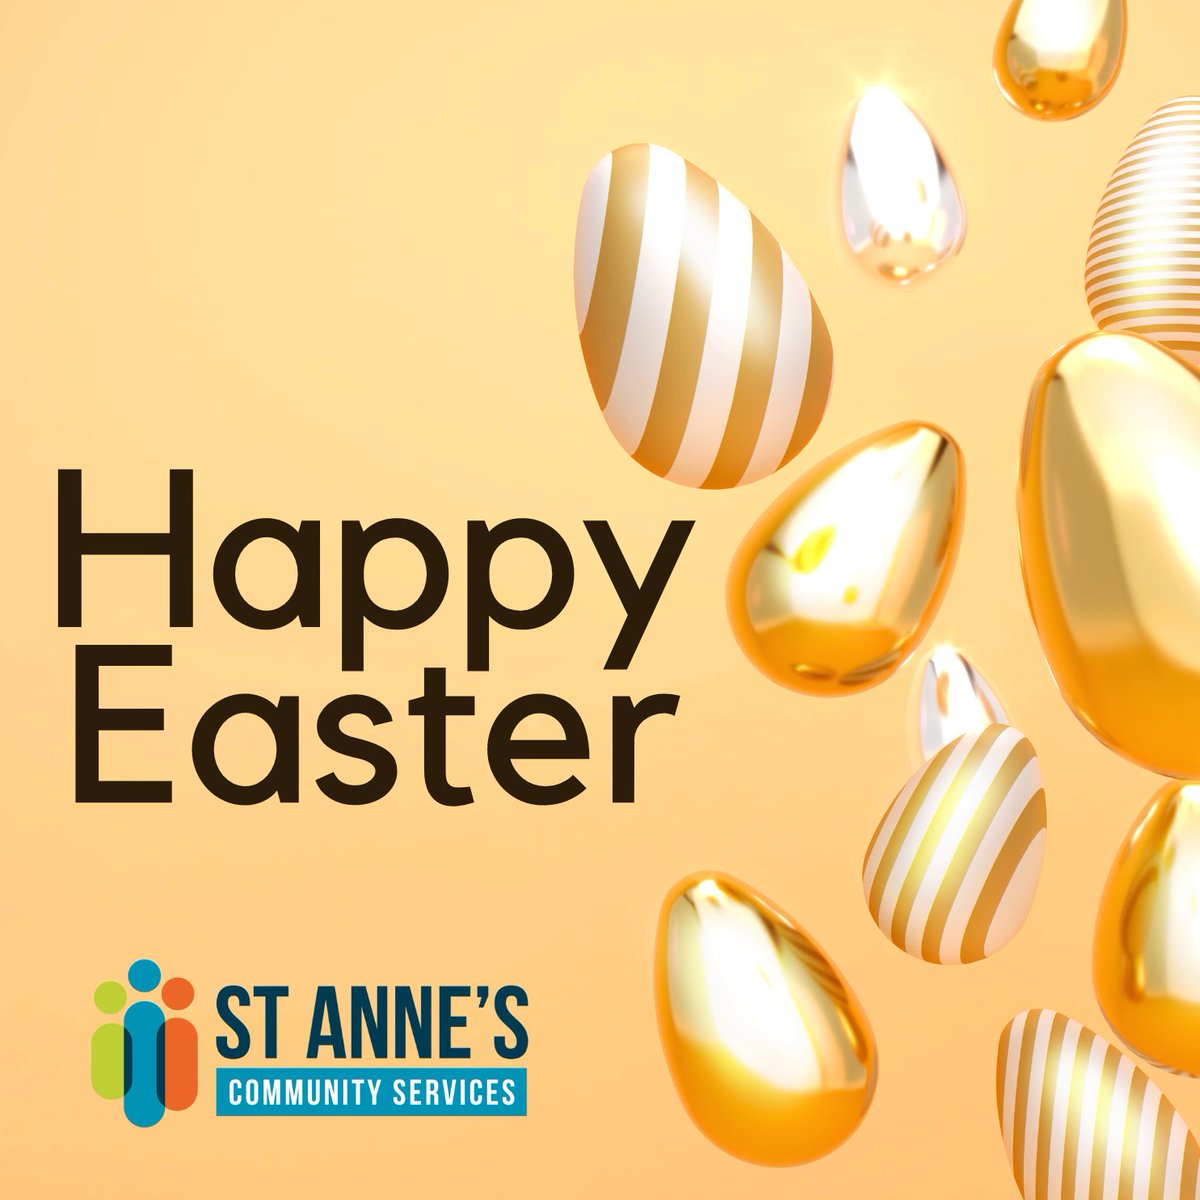 We wish all our clients, colleagues, friends, partners, and supporters a very Happy Easter #Easter #Charity #Care #Support